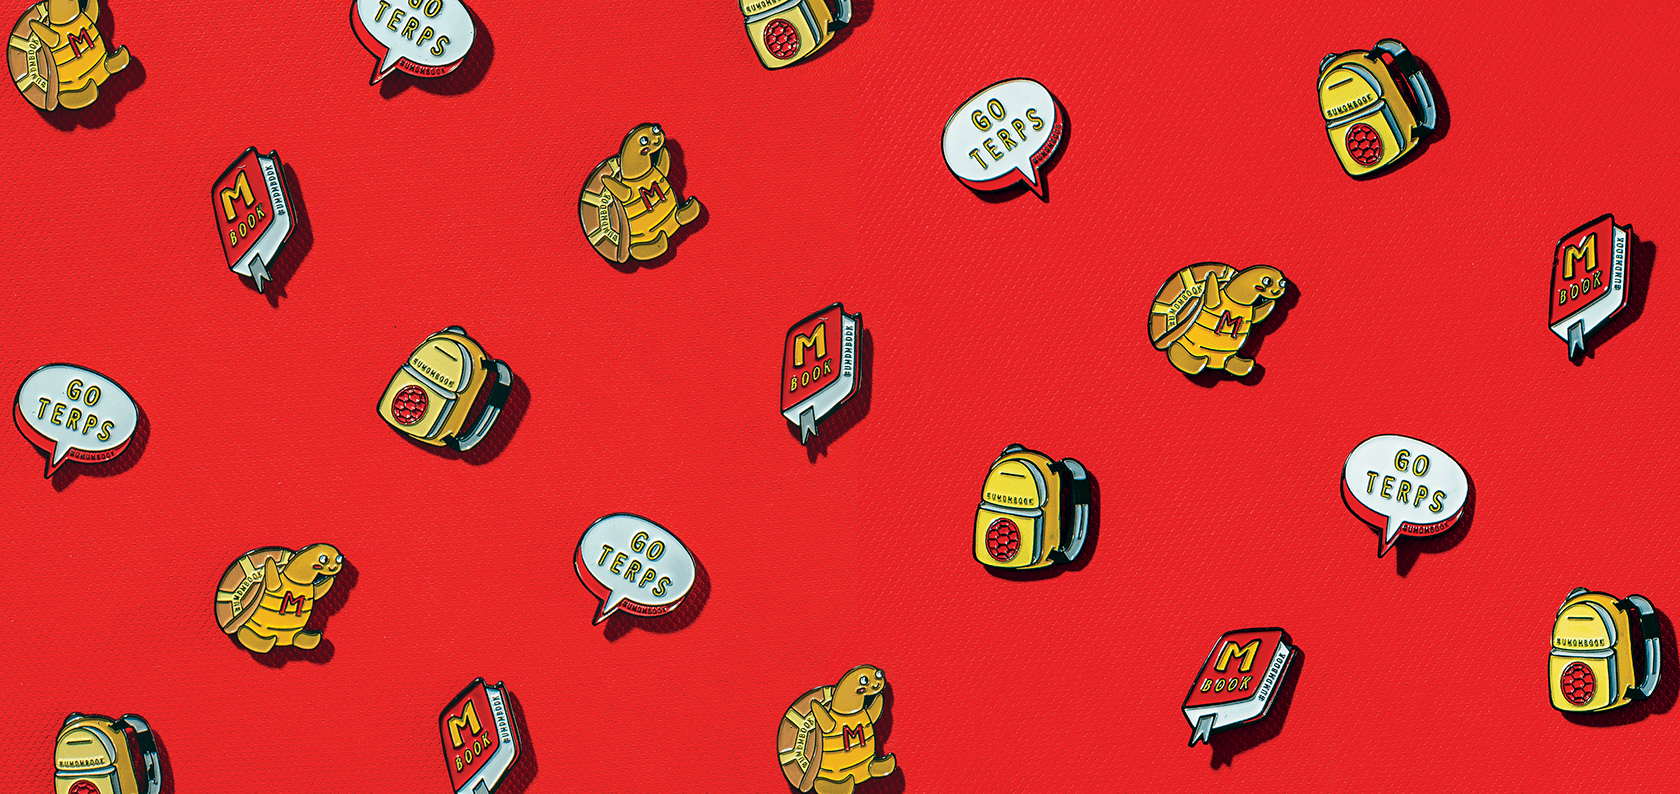 Organized pattern of illustrated enamel pins depicting Testudo, and the M Book on a Maryland Red Background